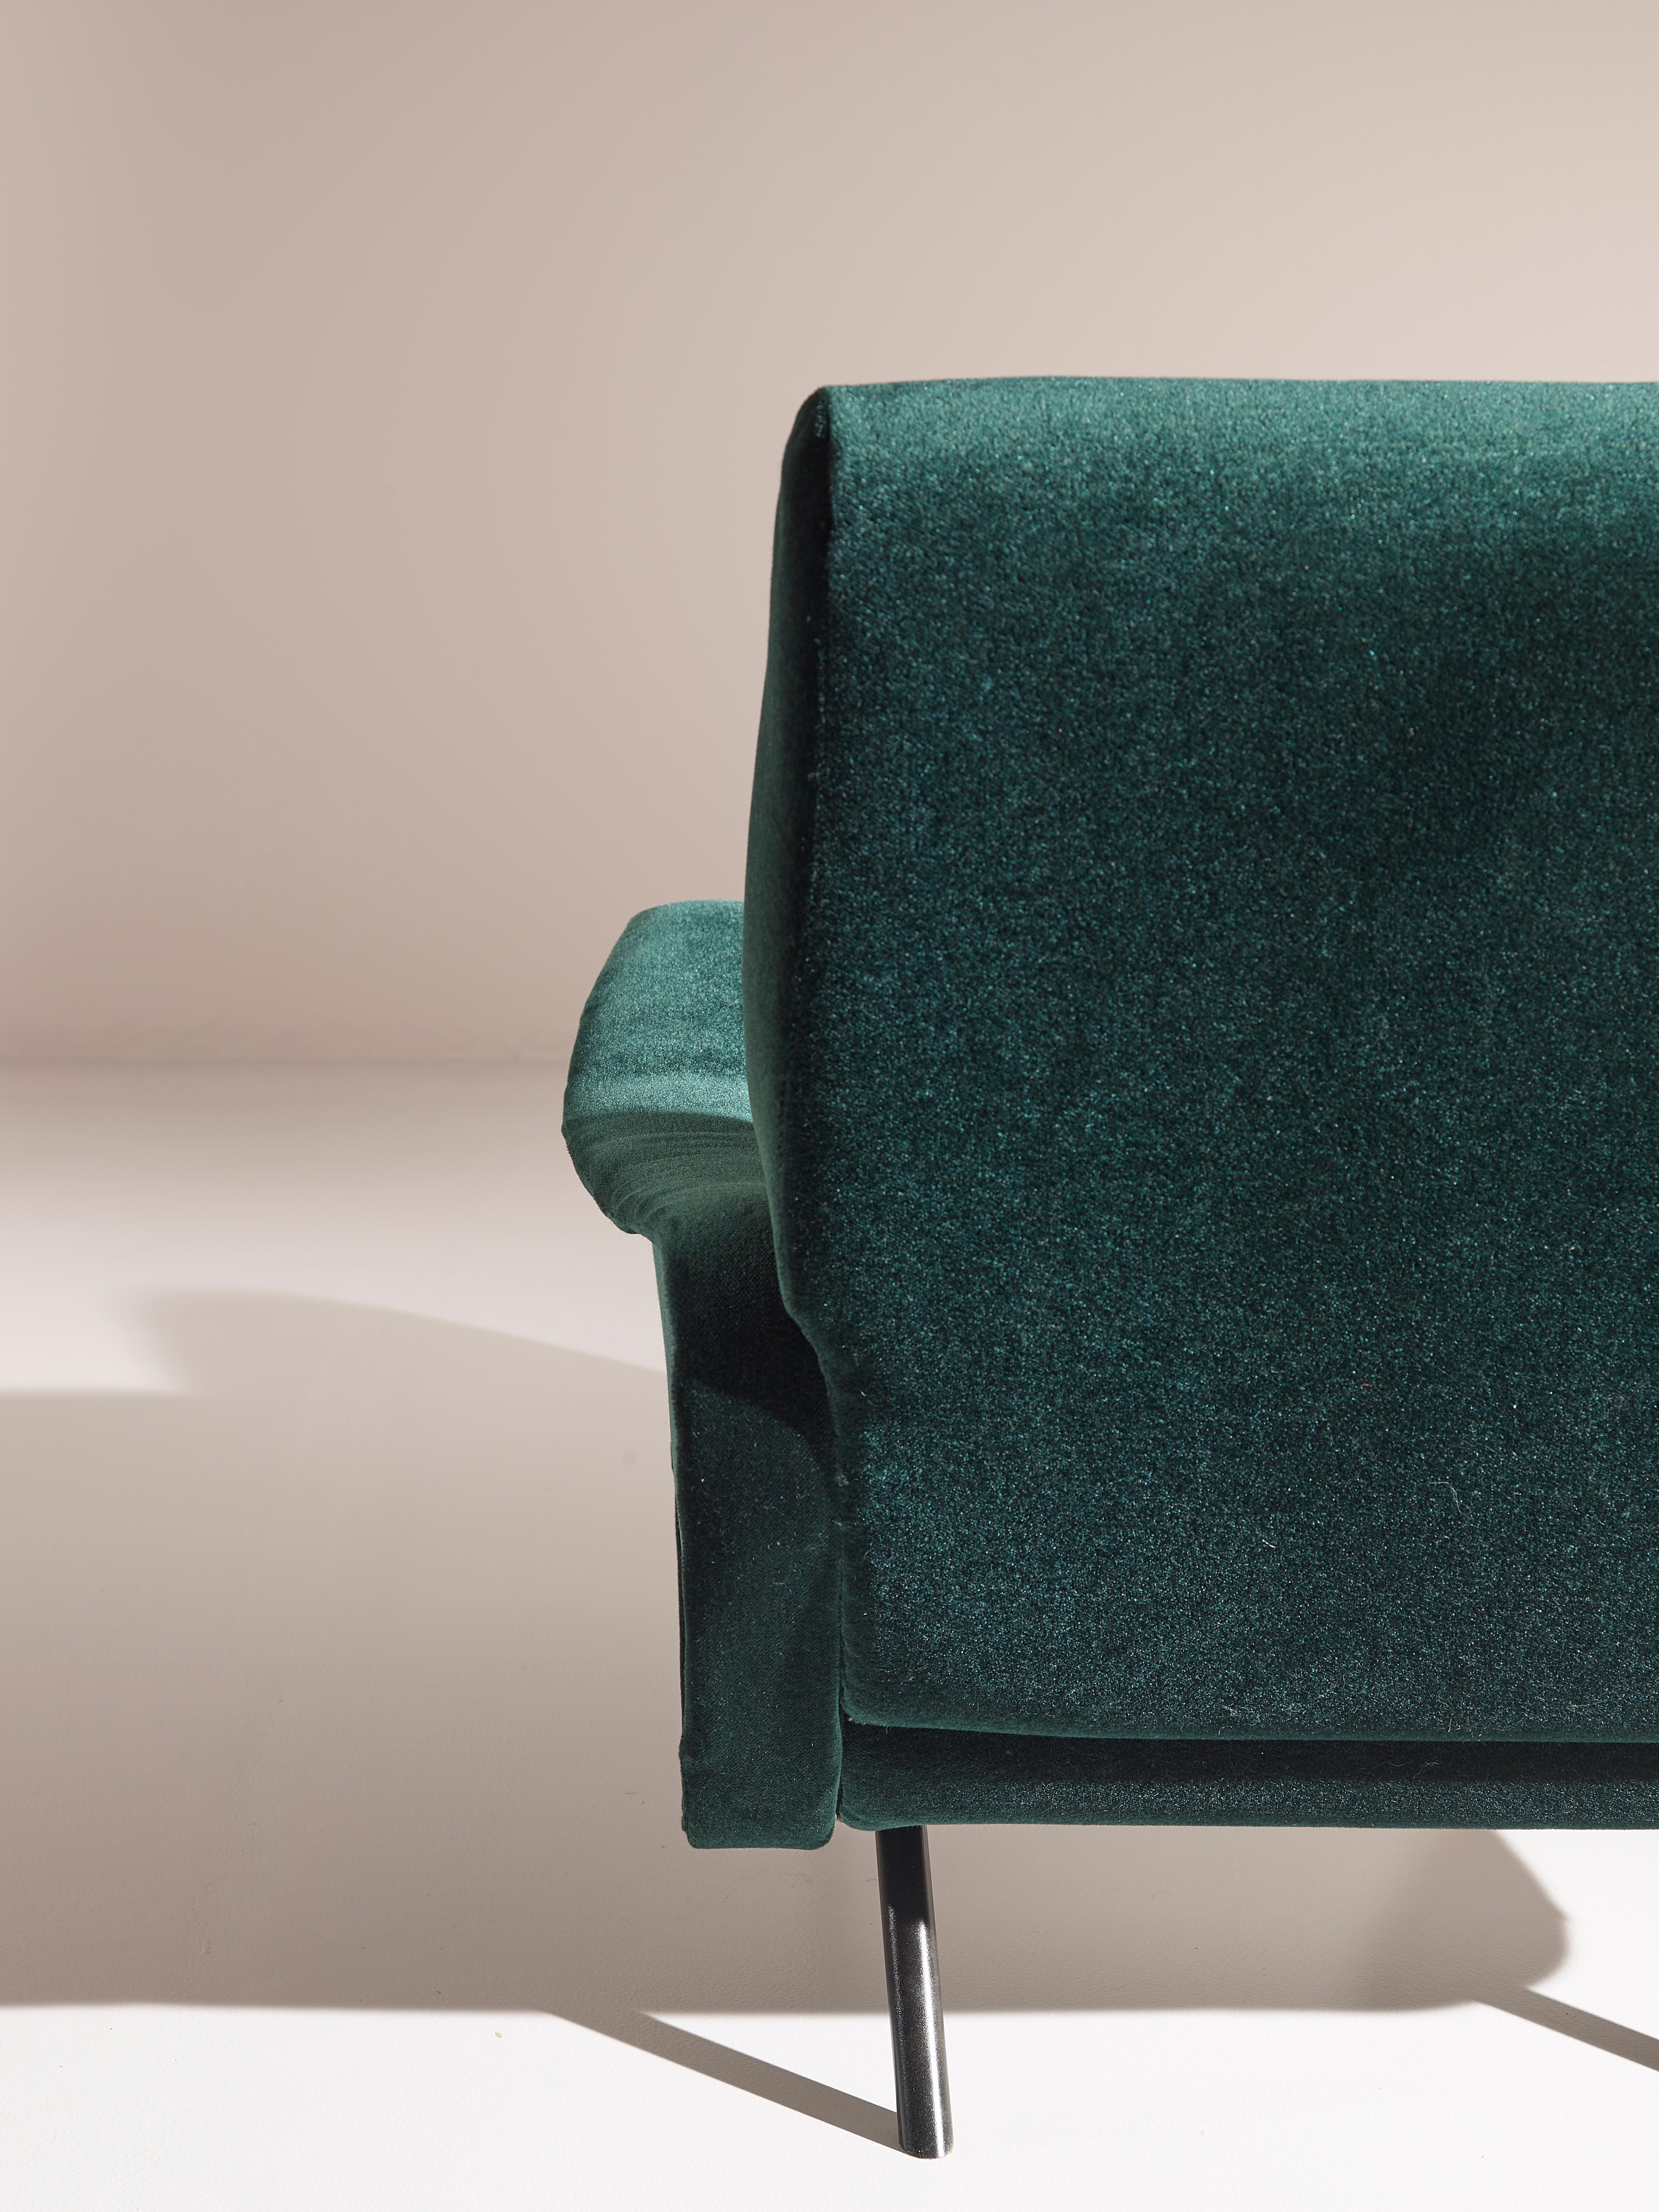 Marco Zanuso Early Pair of ''Lady'' Lounge Chairs Reupholstered in Green Velvet 1